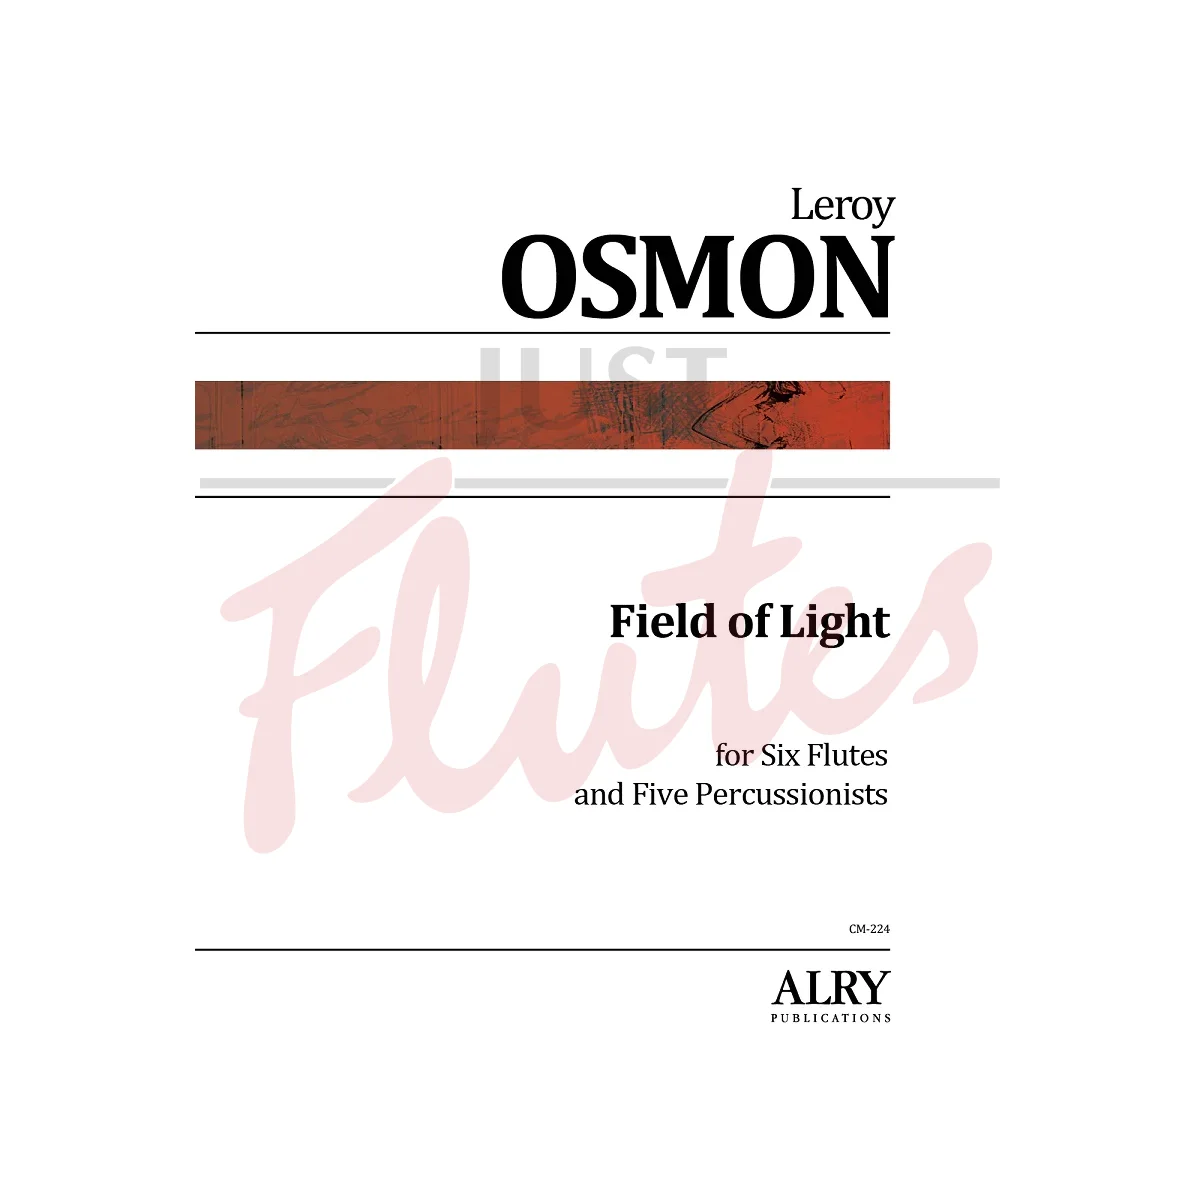 Field of Light for Six Flutes and Five Percussionists